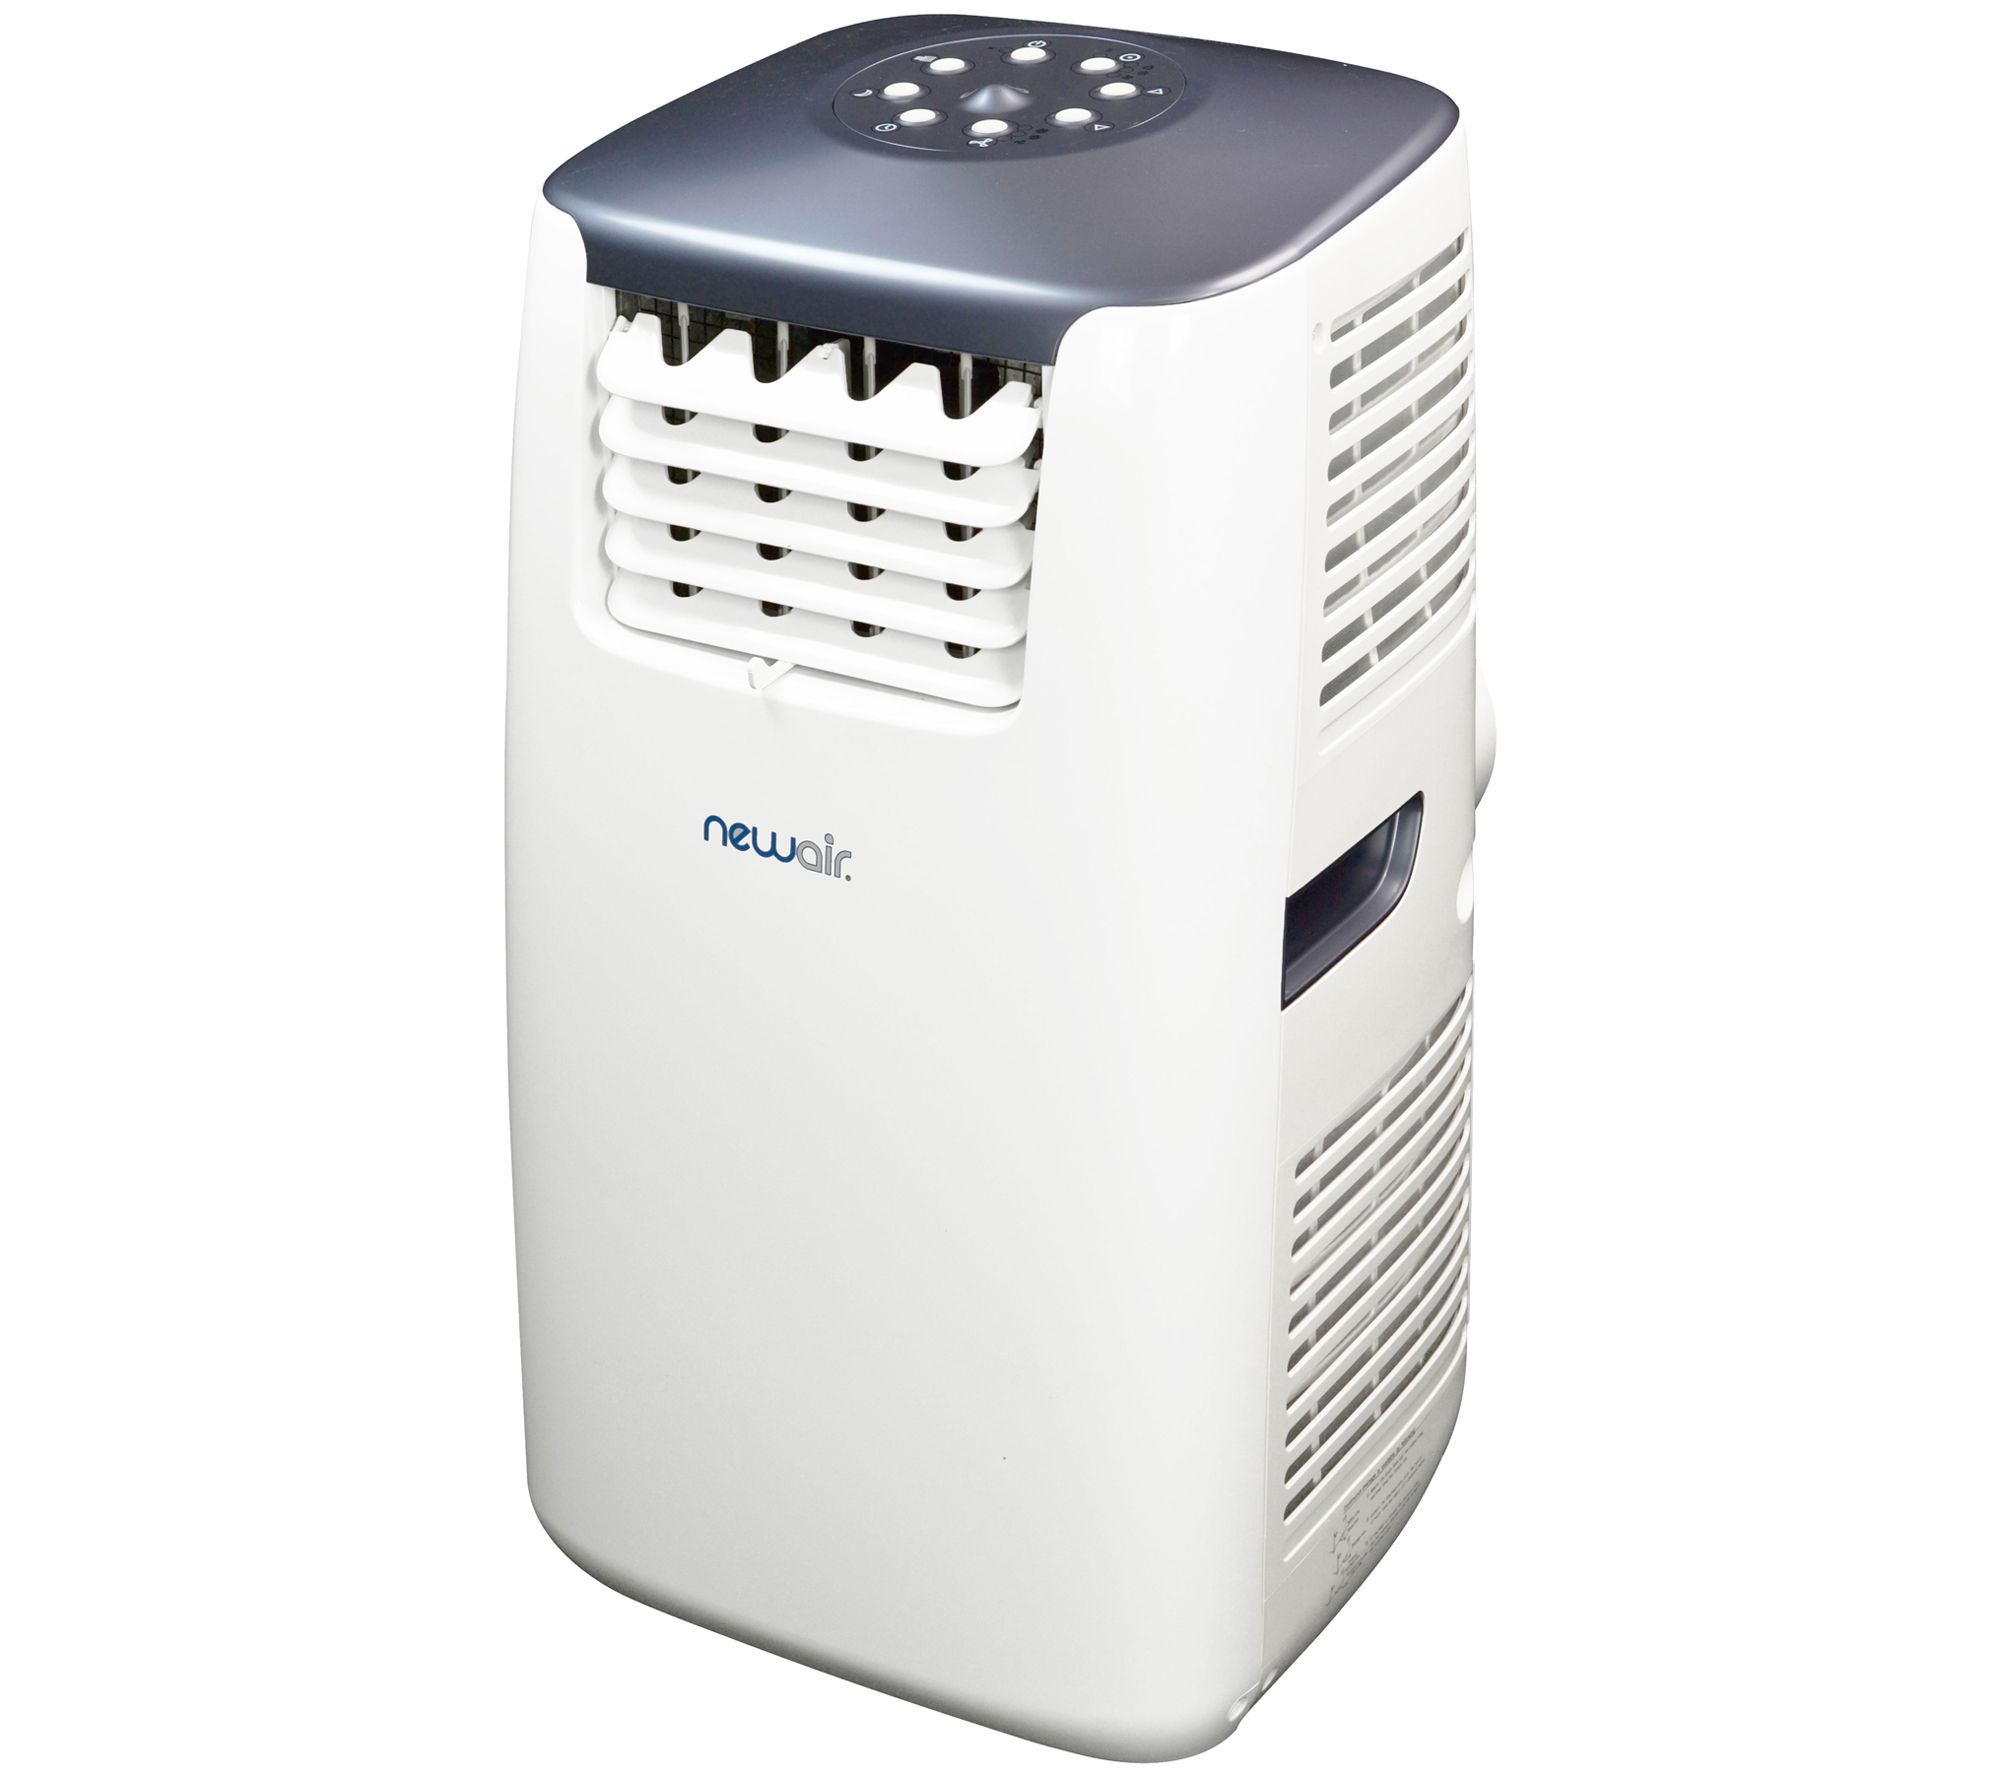 Honeywell Heat and Cool Portable Air Conditioner with Heating Pump, 14,000 BTU